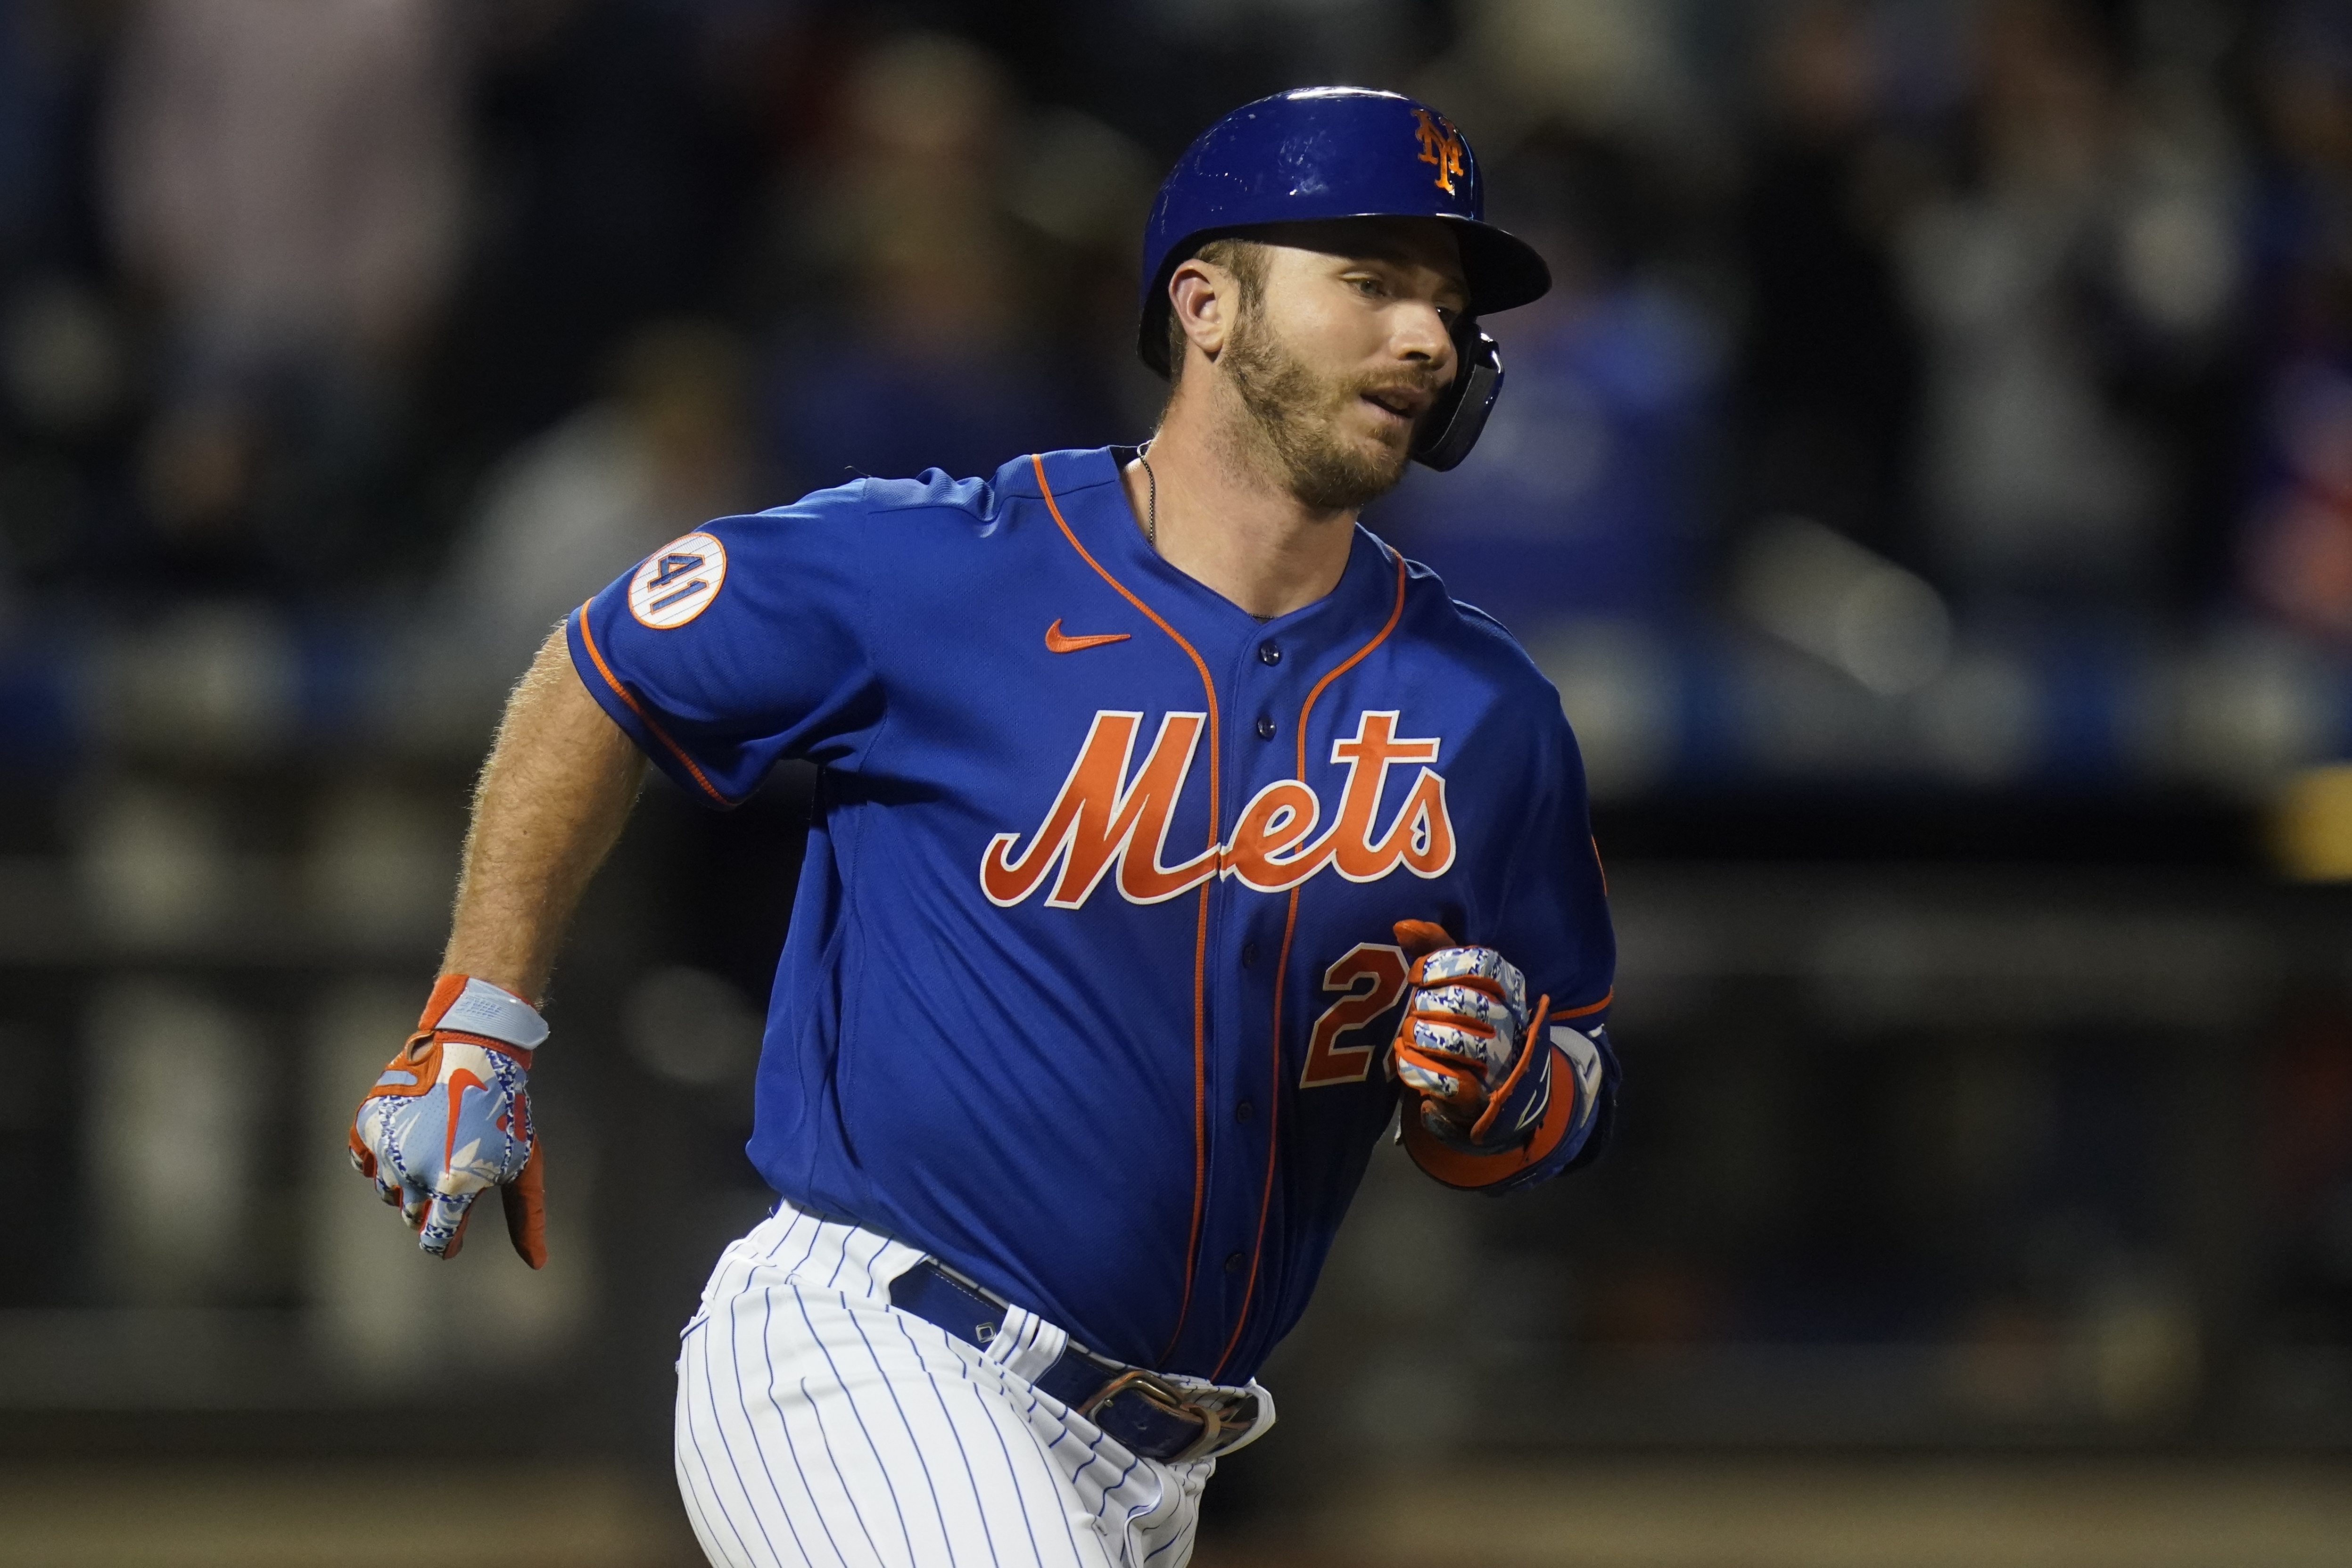 Pete Alonso, the NL home run leader, makes speedy return to Mets after  wrist injury - NBC Sports